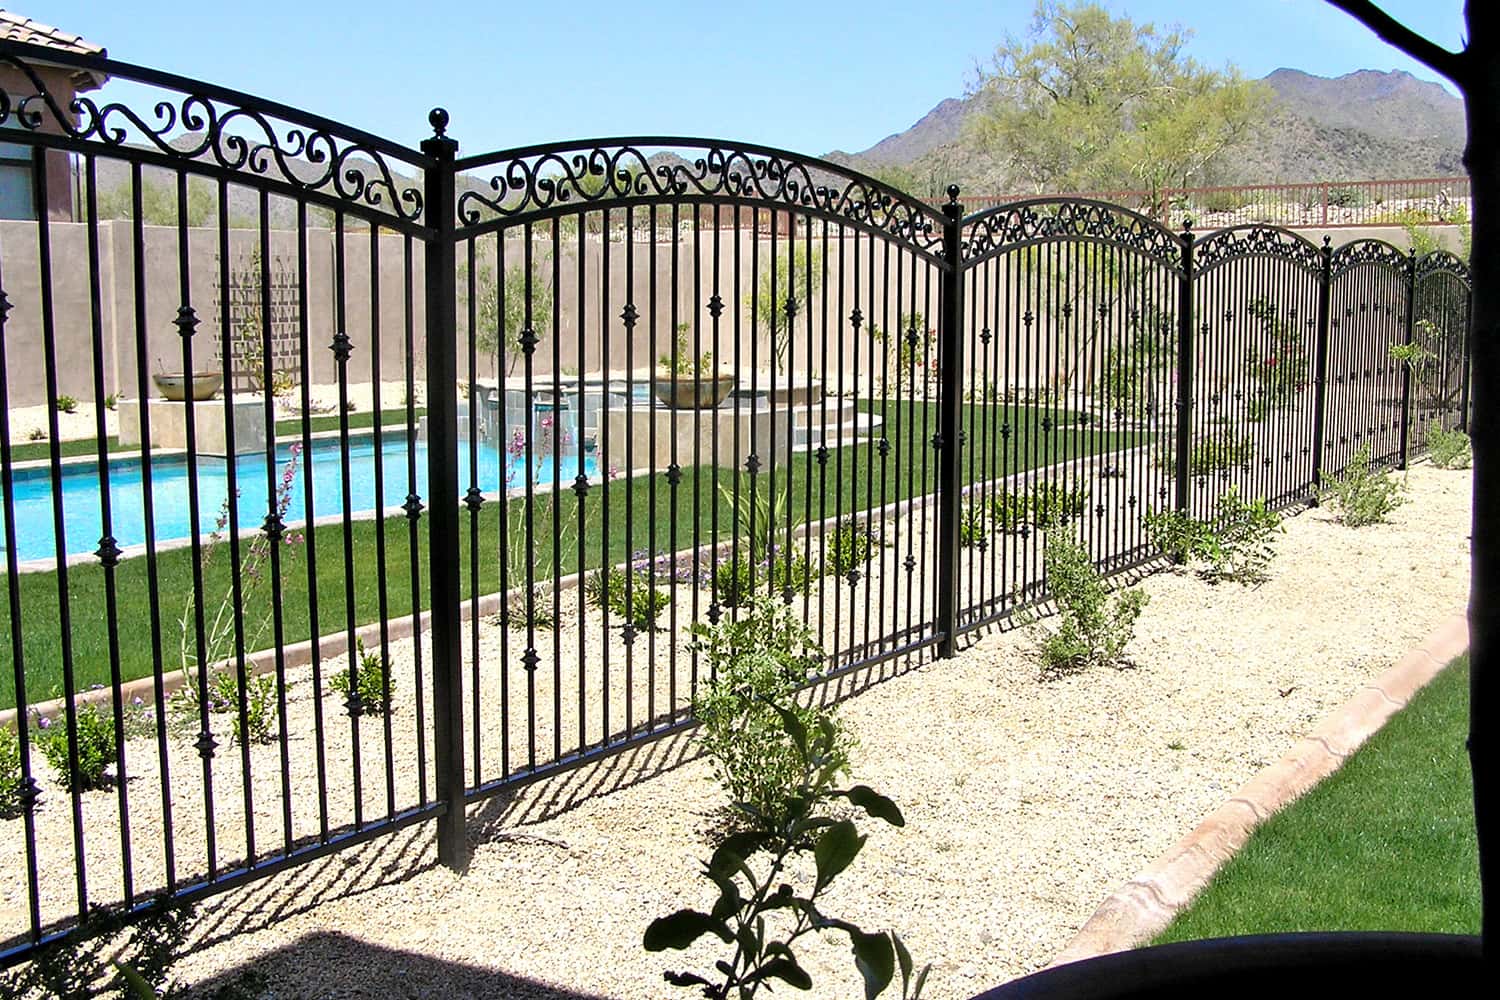 3-Rail Arched Decorative Pool Fencing with Scrolls